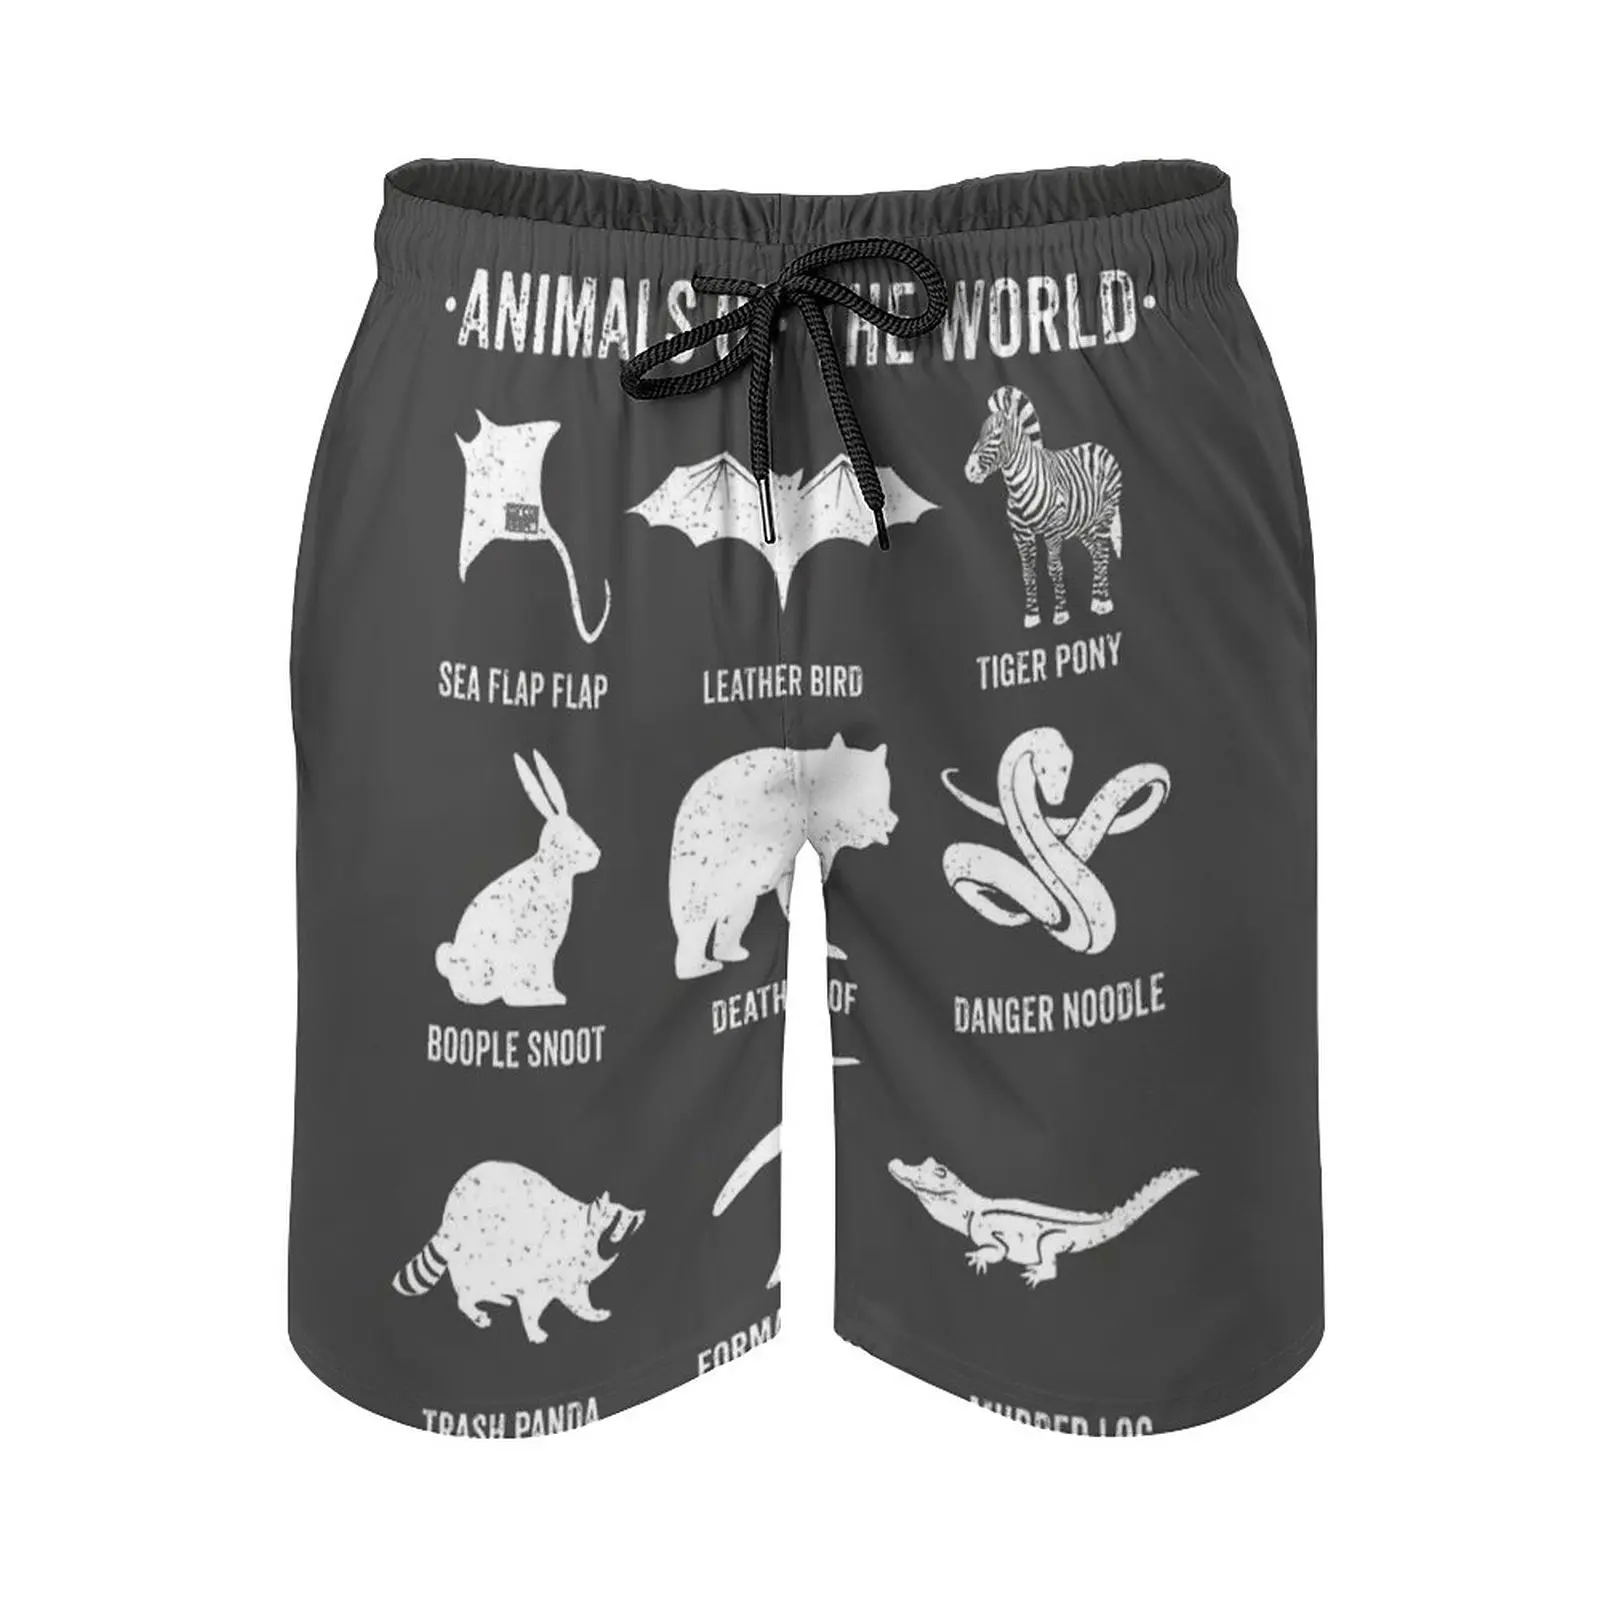 

Simple Vintage Humor Funny Rare Animals Of The World Men's Sports Short Beach Shorts Surfing Swimming Boxer Trunks Bathing